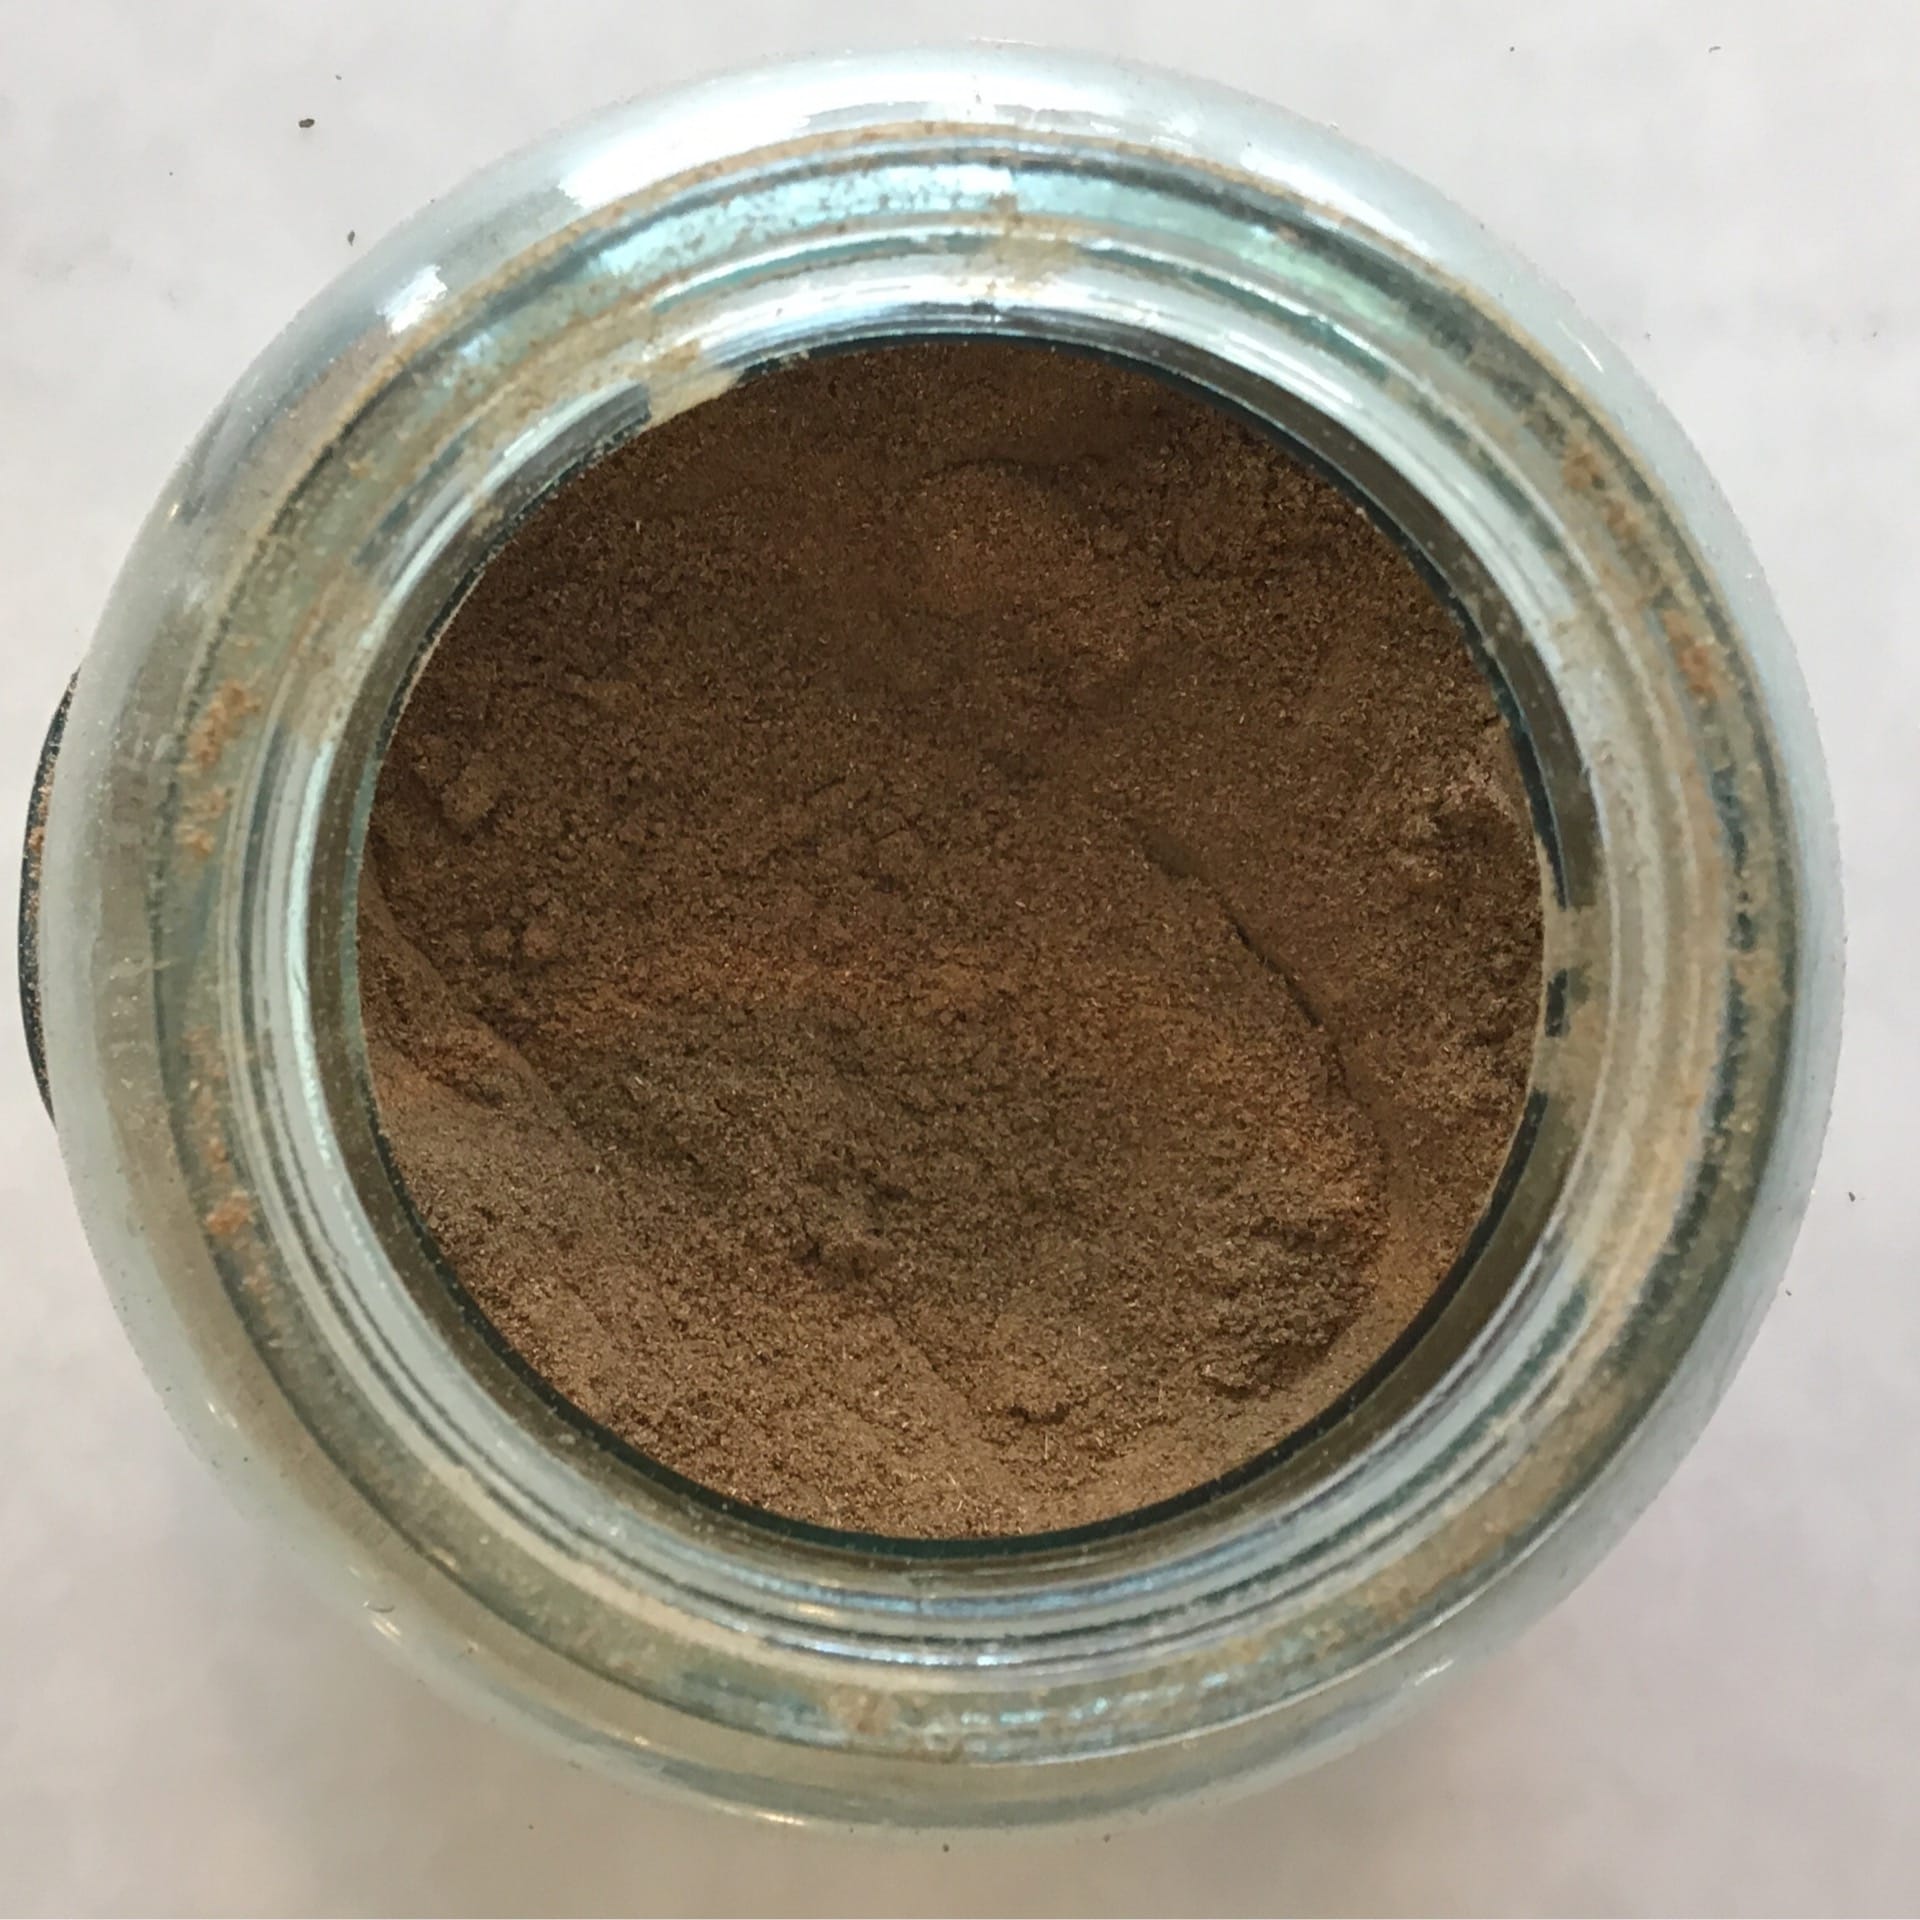 chinese 5 spice blend 3 oz